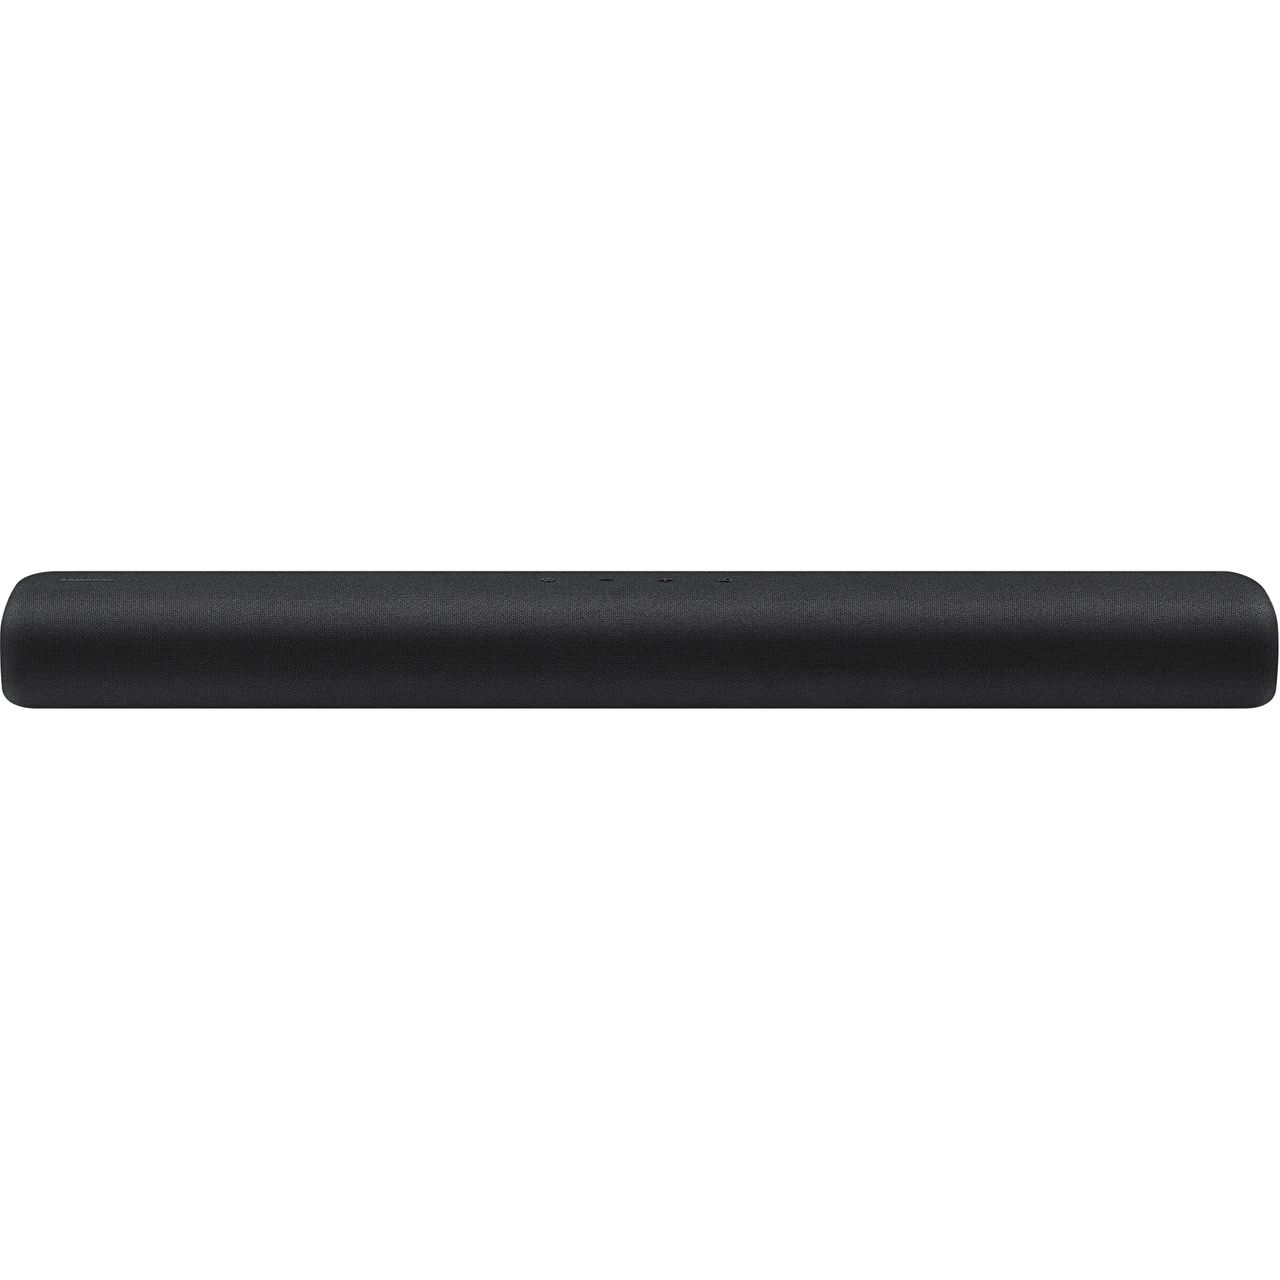 Samsung HW-S40T Bluetooth 2 Soundbar with Built-in Subwoofer Review